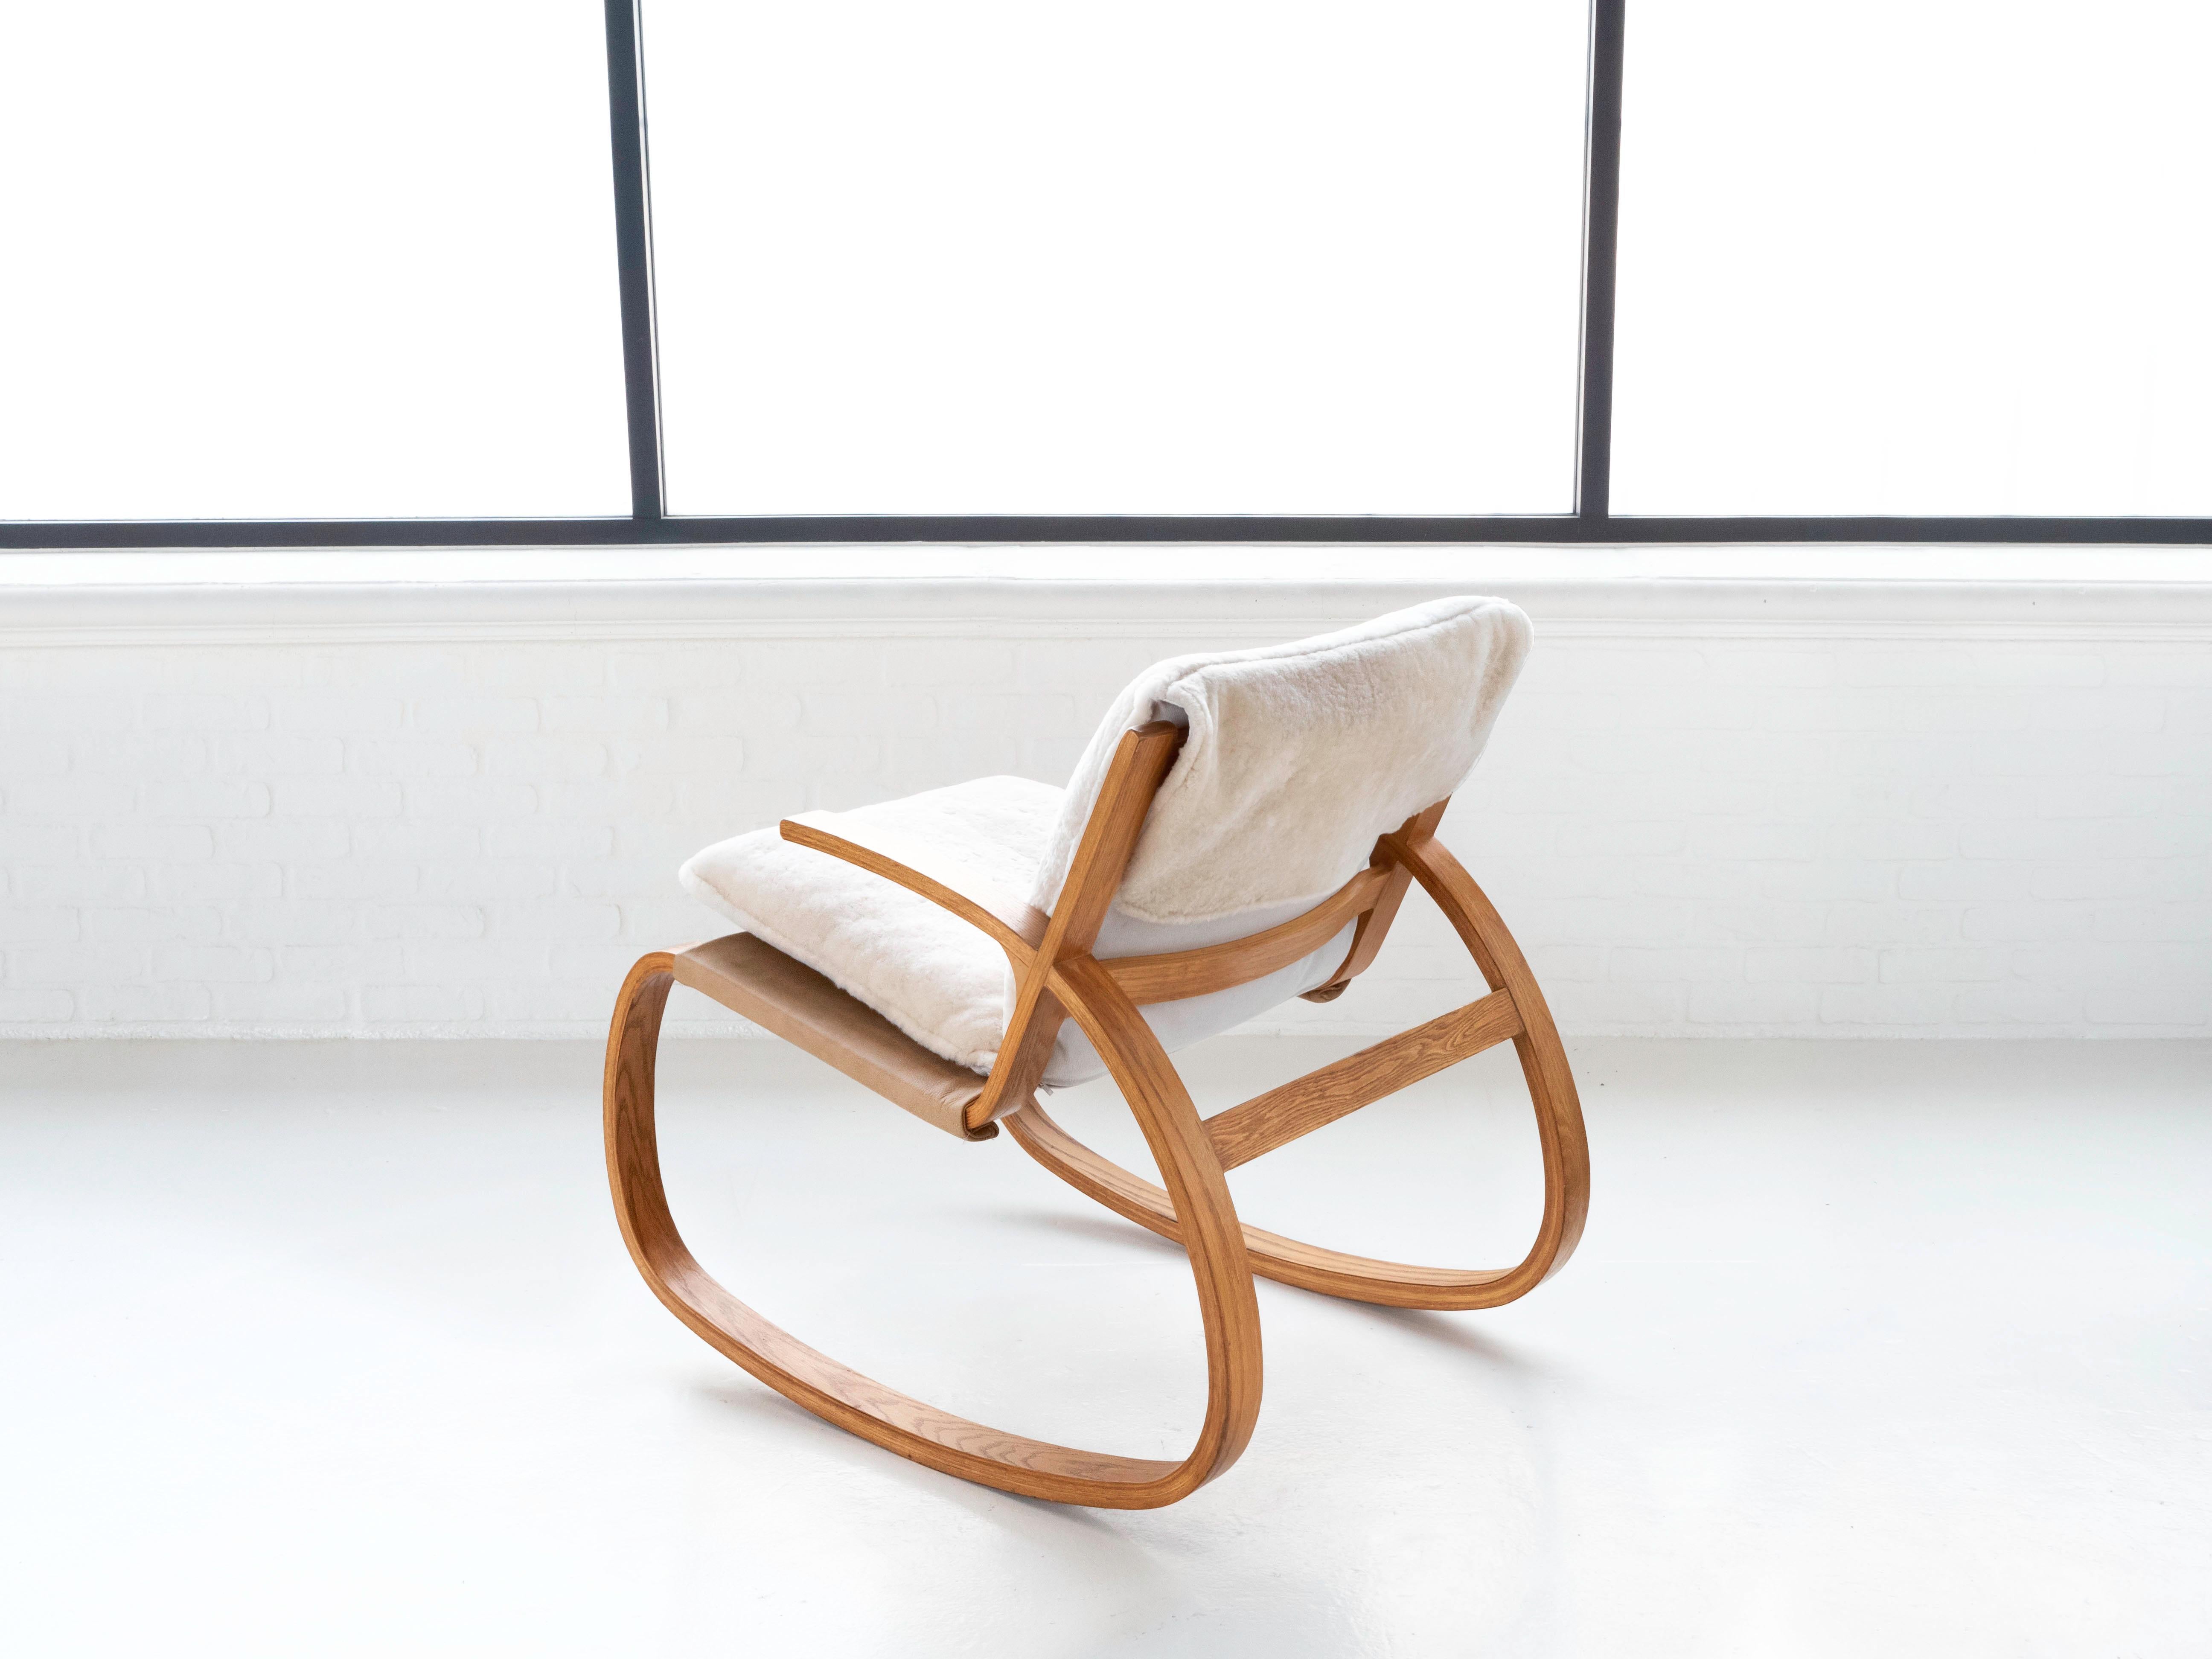 Late 20th Century Oak Bentwood Sling Rocking Chair in Shearling by Plycraft, Circa 1970's For Sale